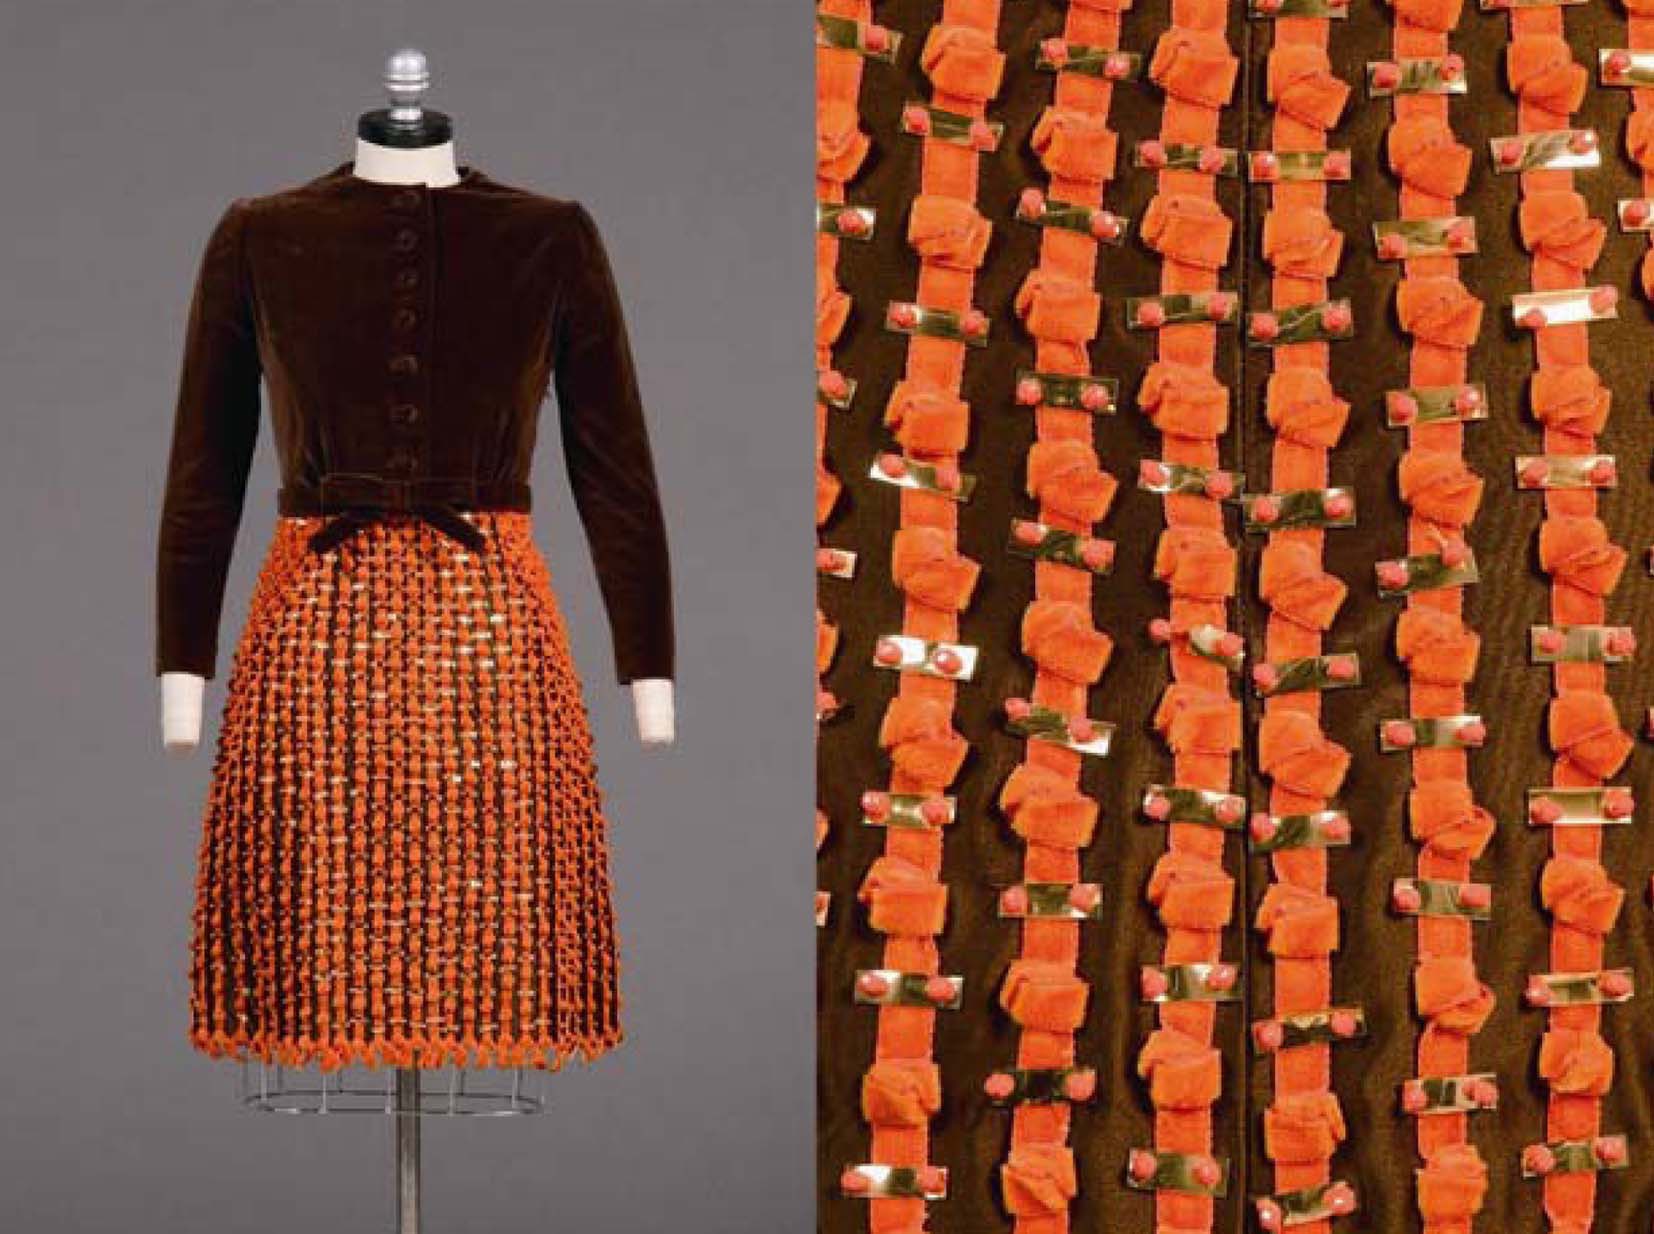 Texture decoration with metal plates and velvet ribbons, Arnold Scassi, 1965-67. blog.fidmmuseum.org.